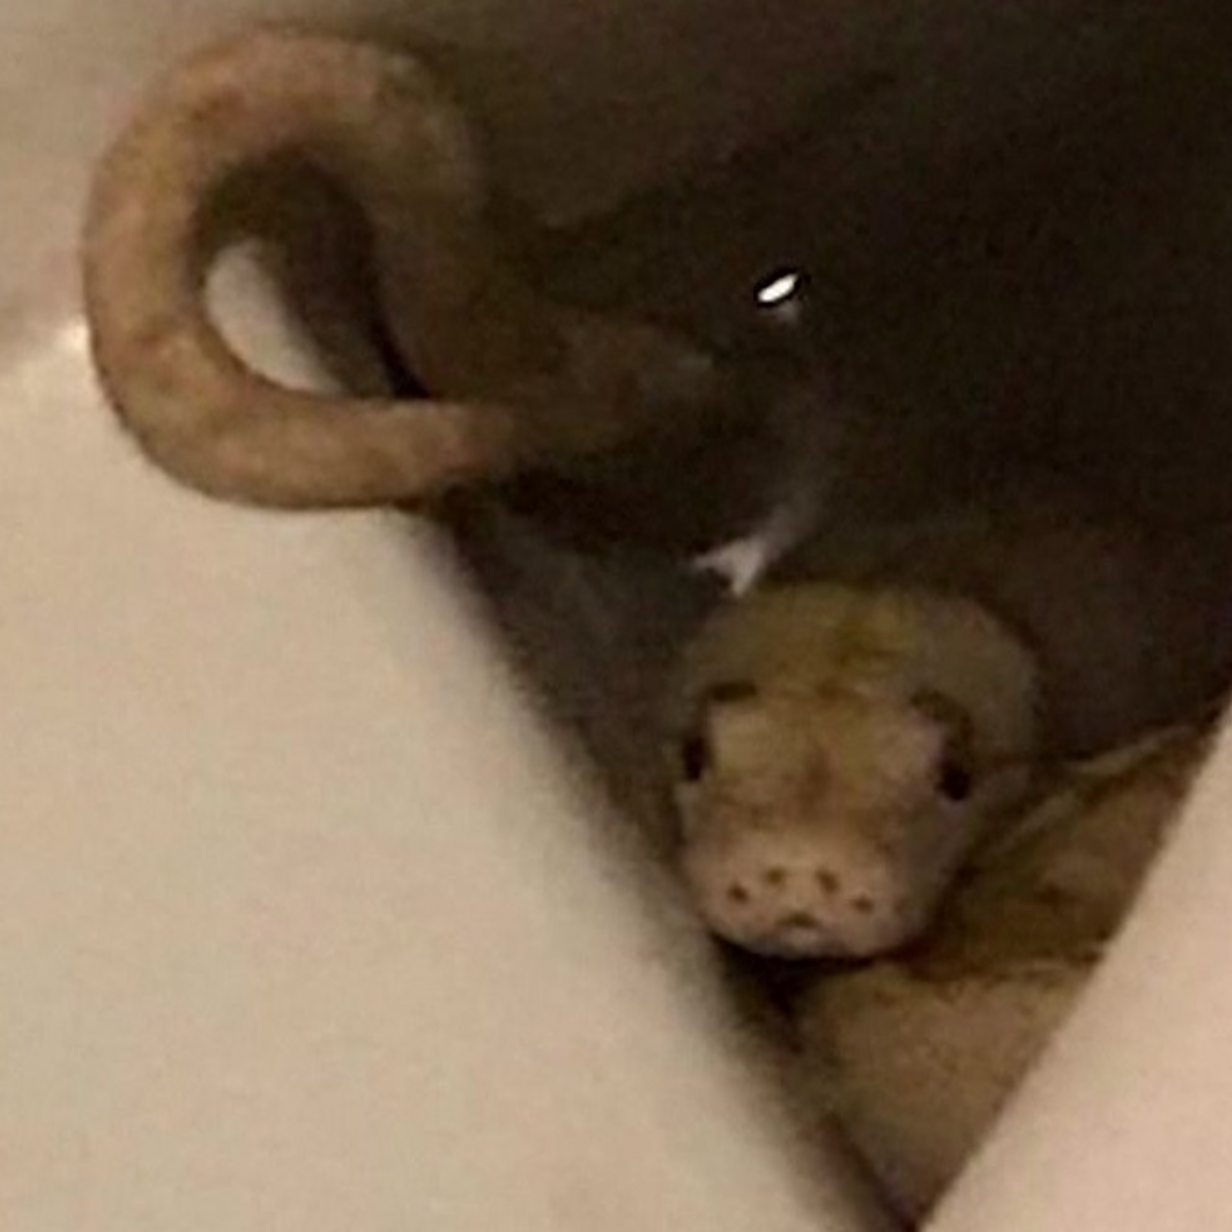 Australian family finds python taking a shower in their bathroom